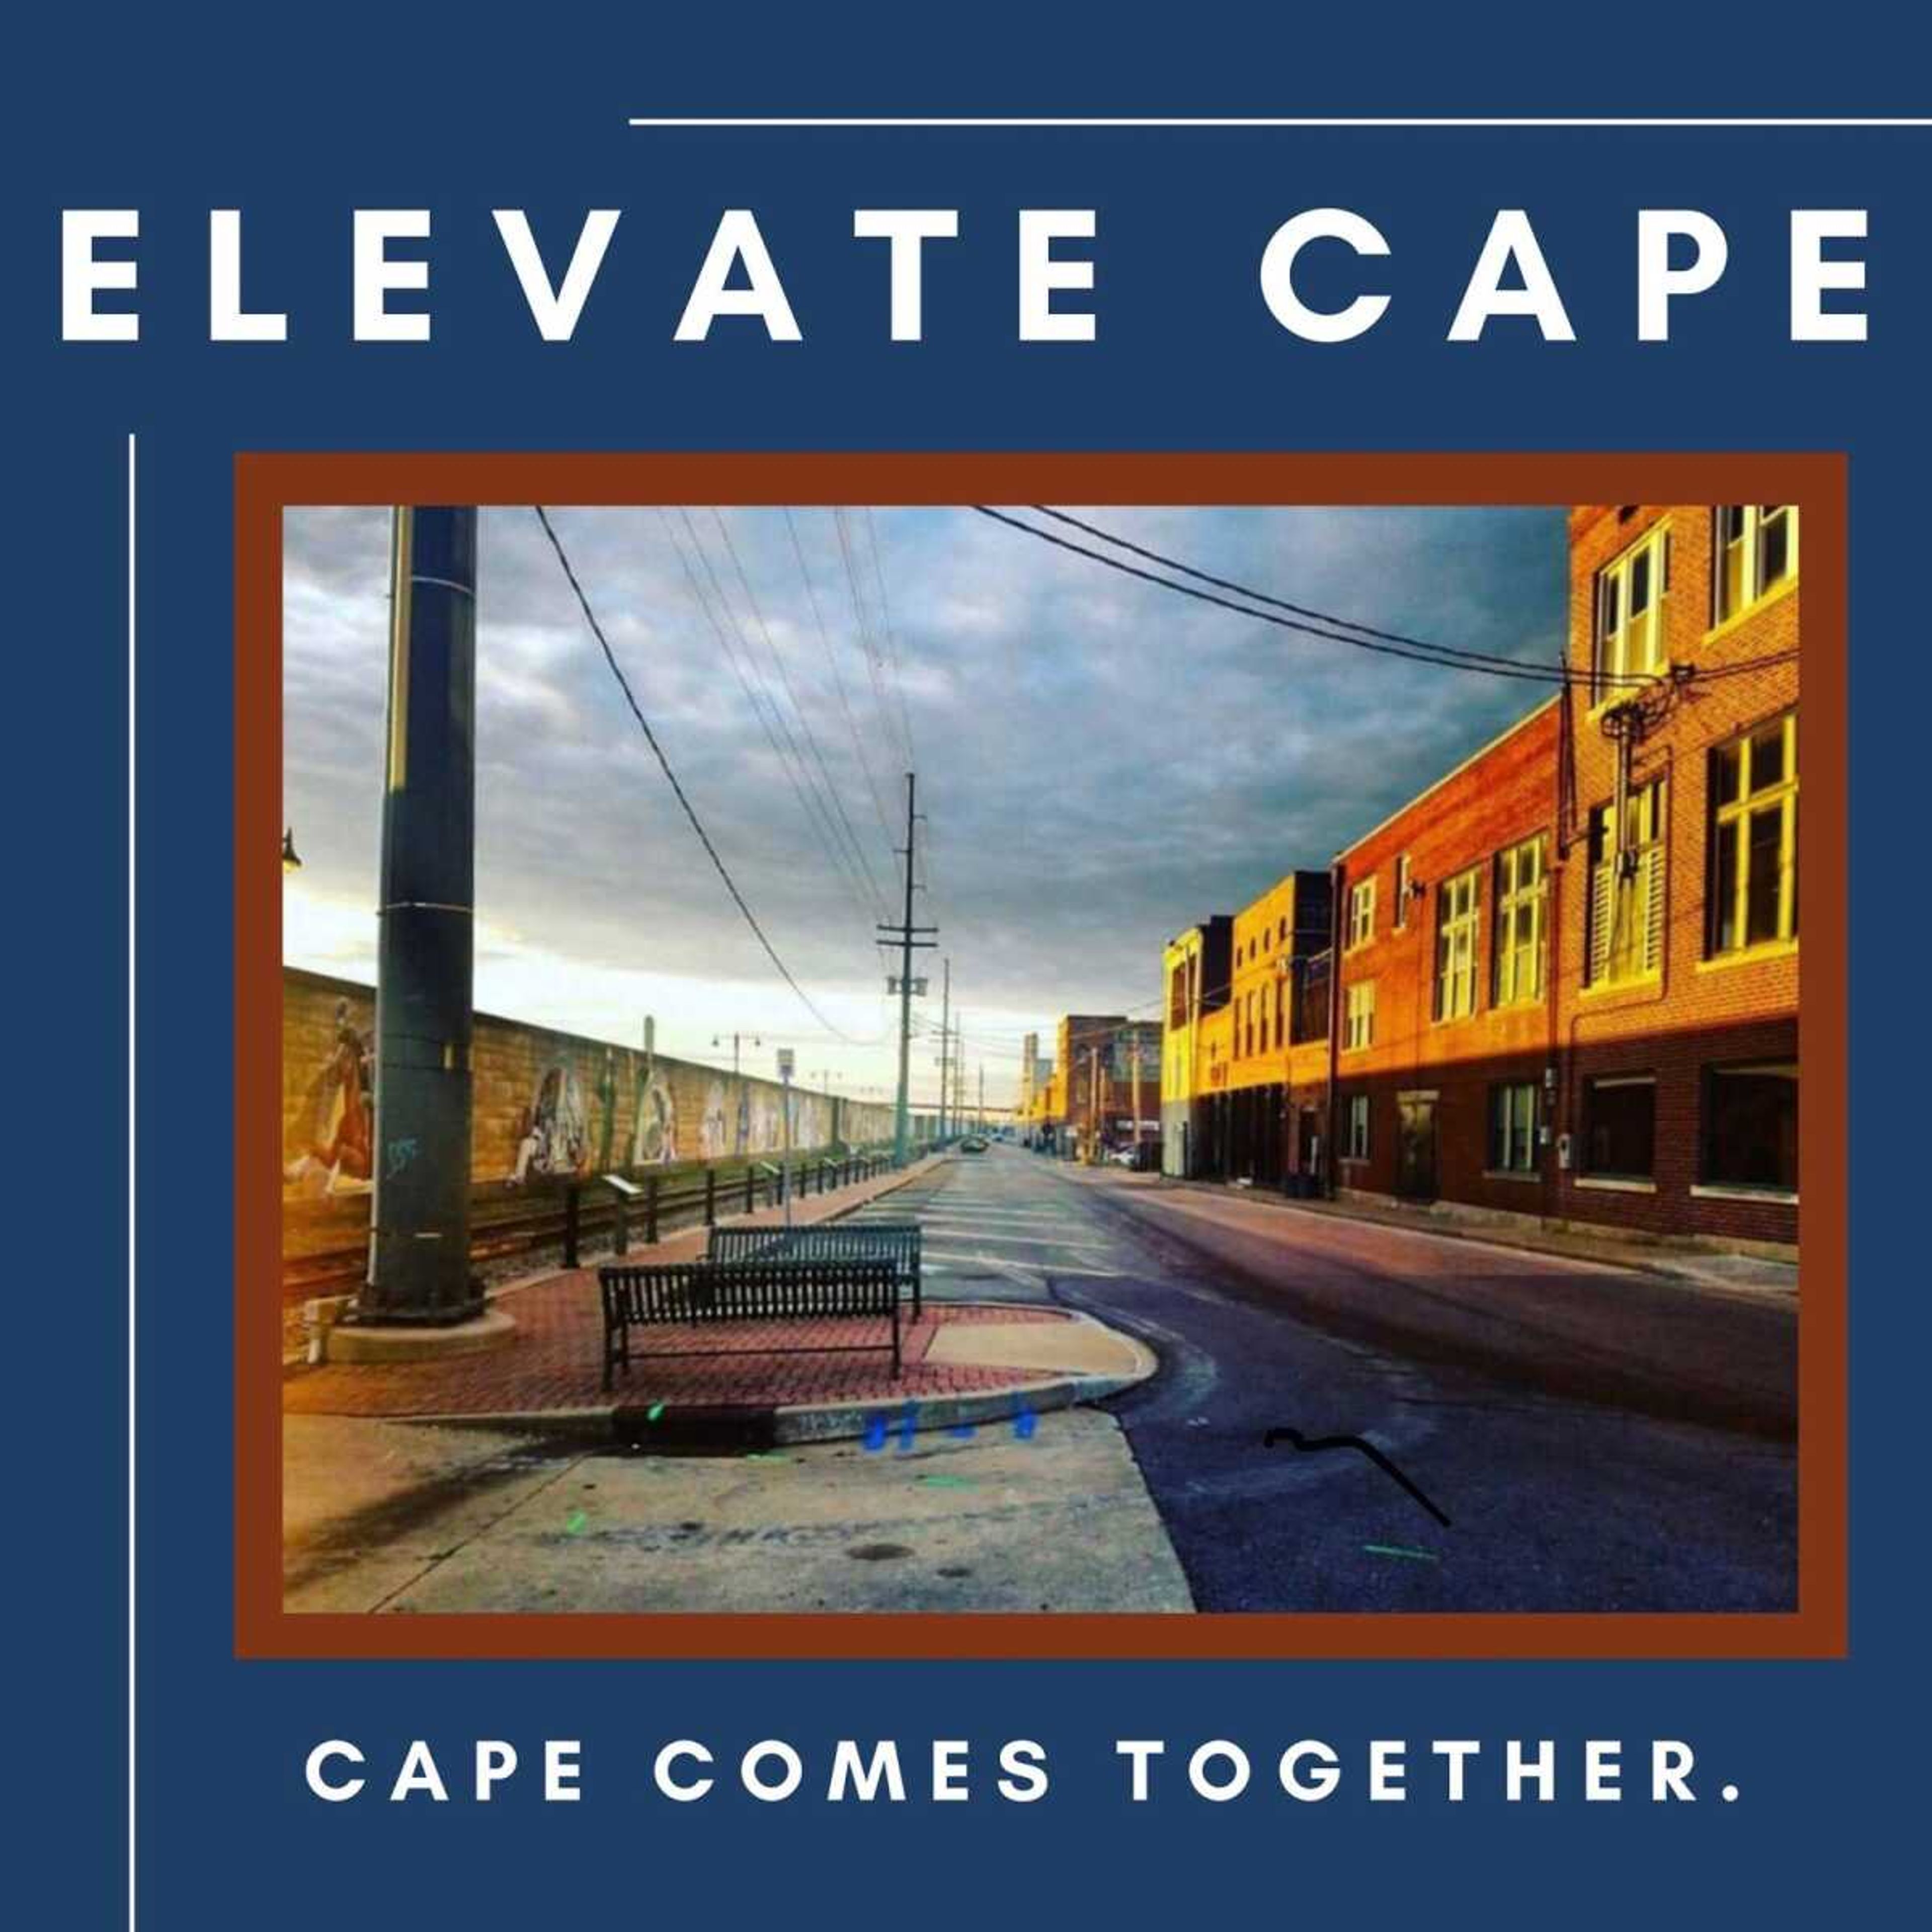 In an effort to bring positive social media content to Cape Girardeau, local businesses and organizations have joined forces through Elevate Cape.